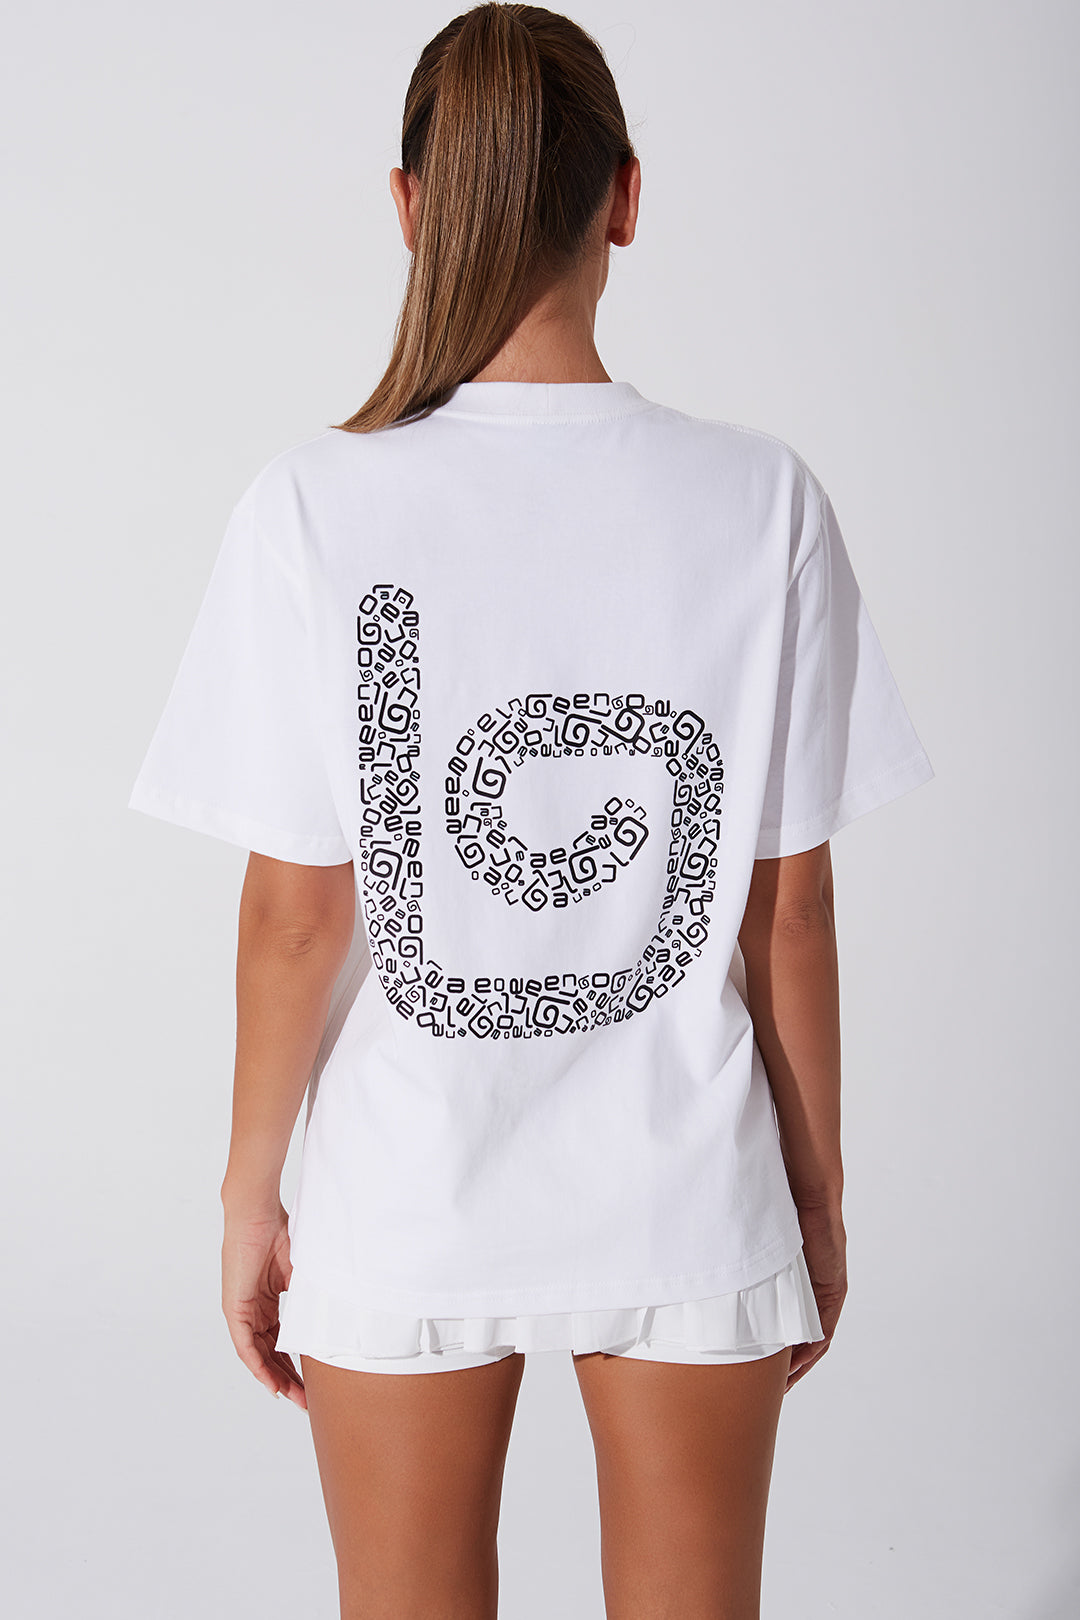 Unisex white short sleeve tee for women, limited edition, style OW-0173-WSS-WT, image 2.